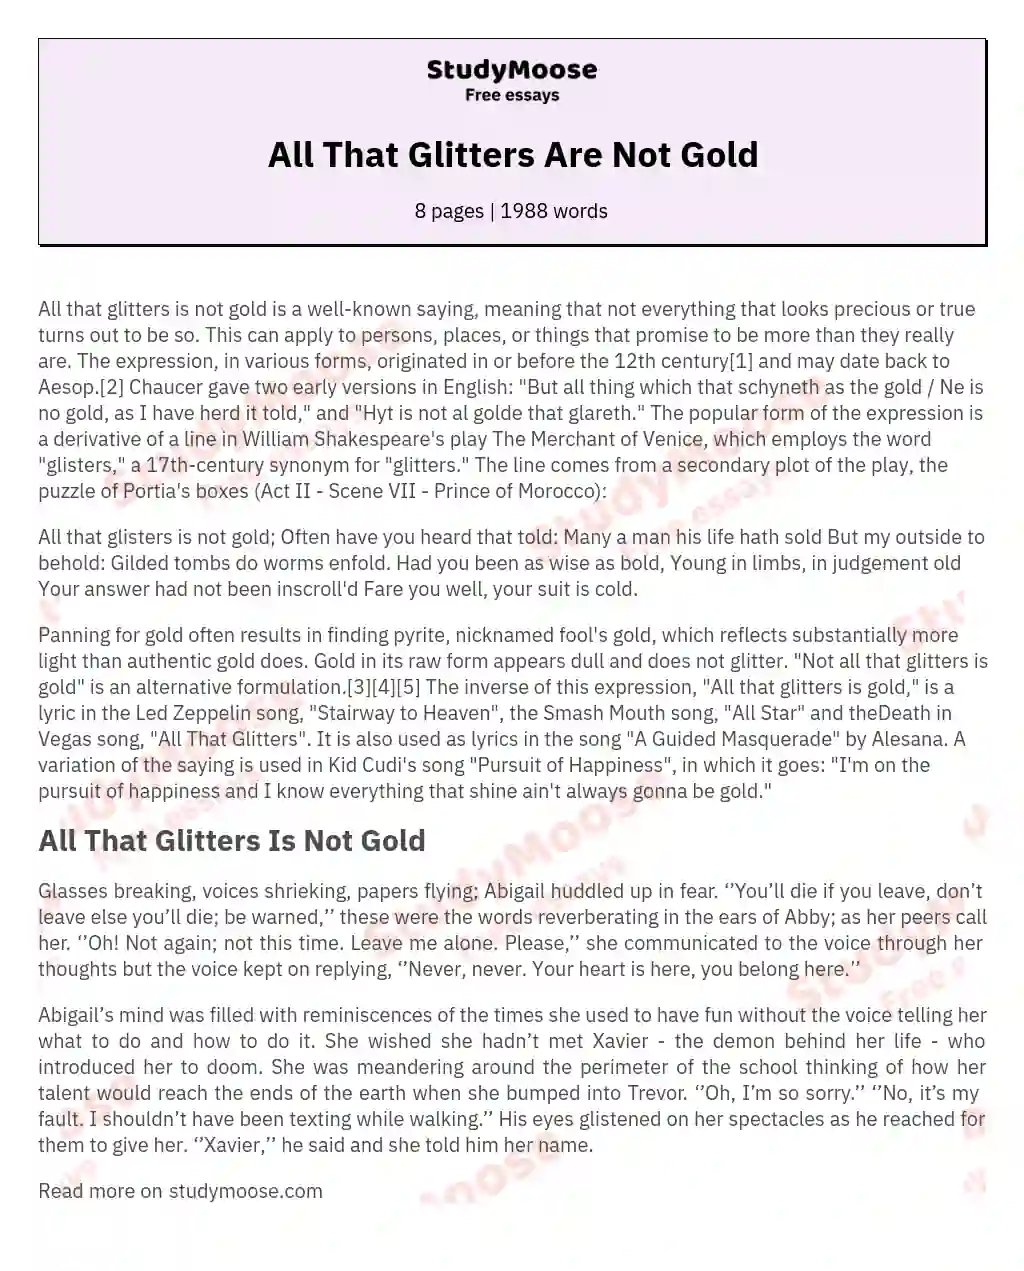 All That Glitters Are Not Gold essay